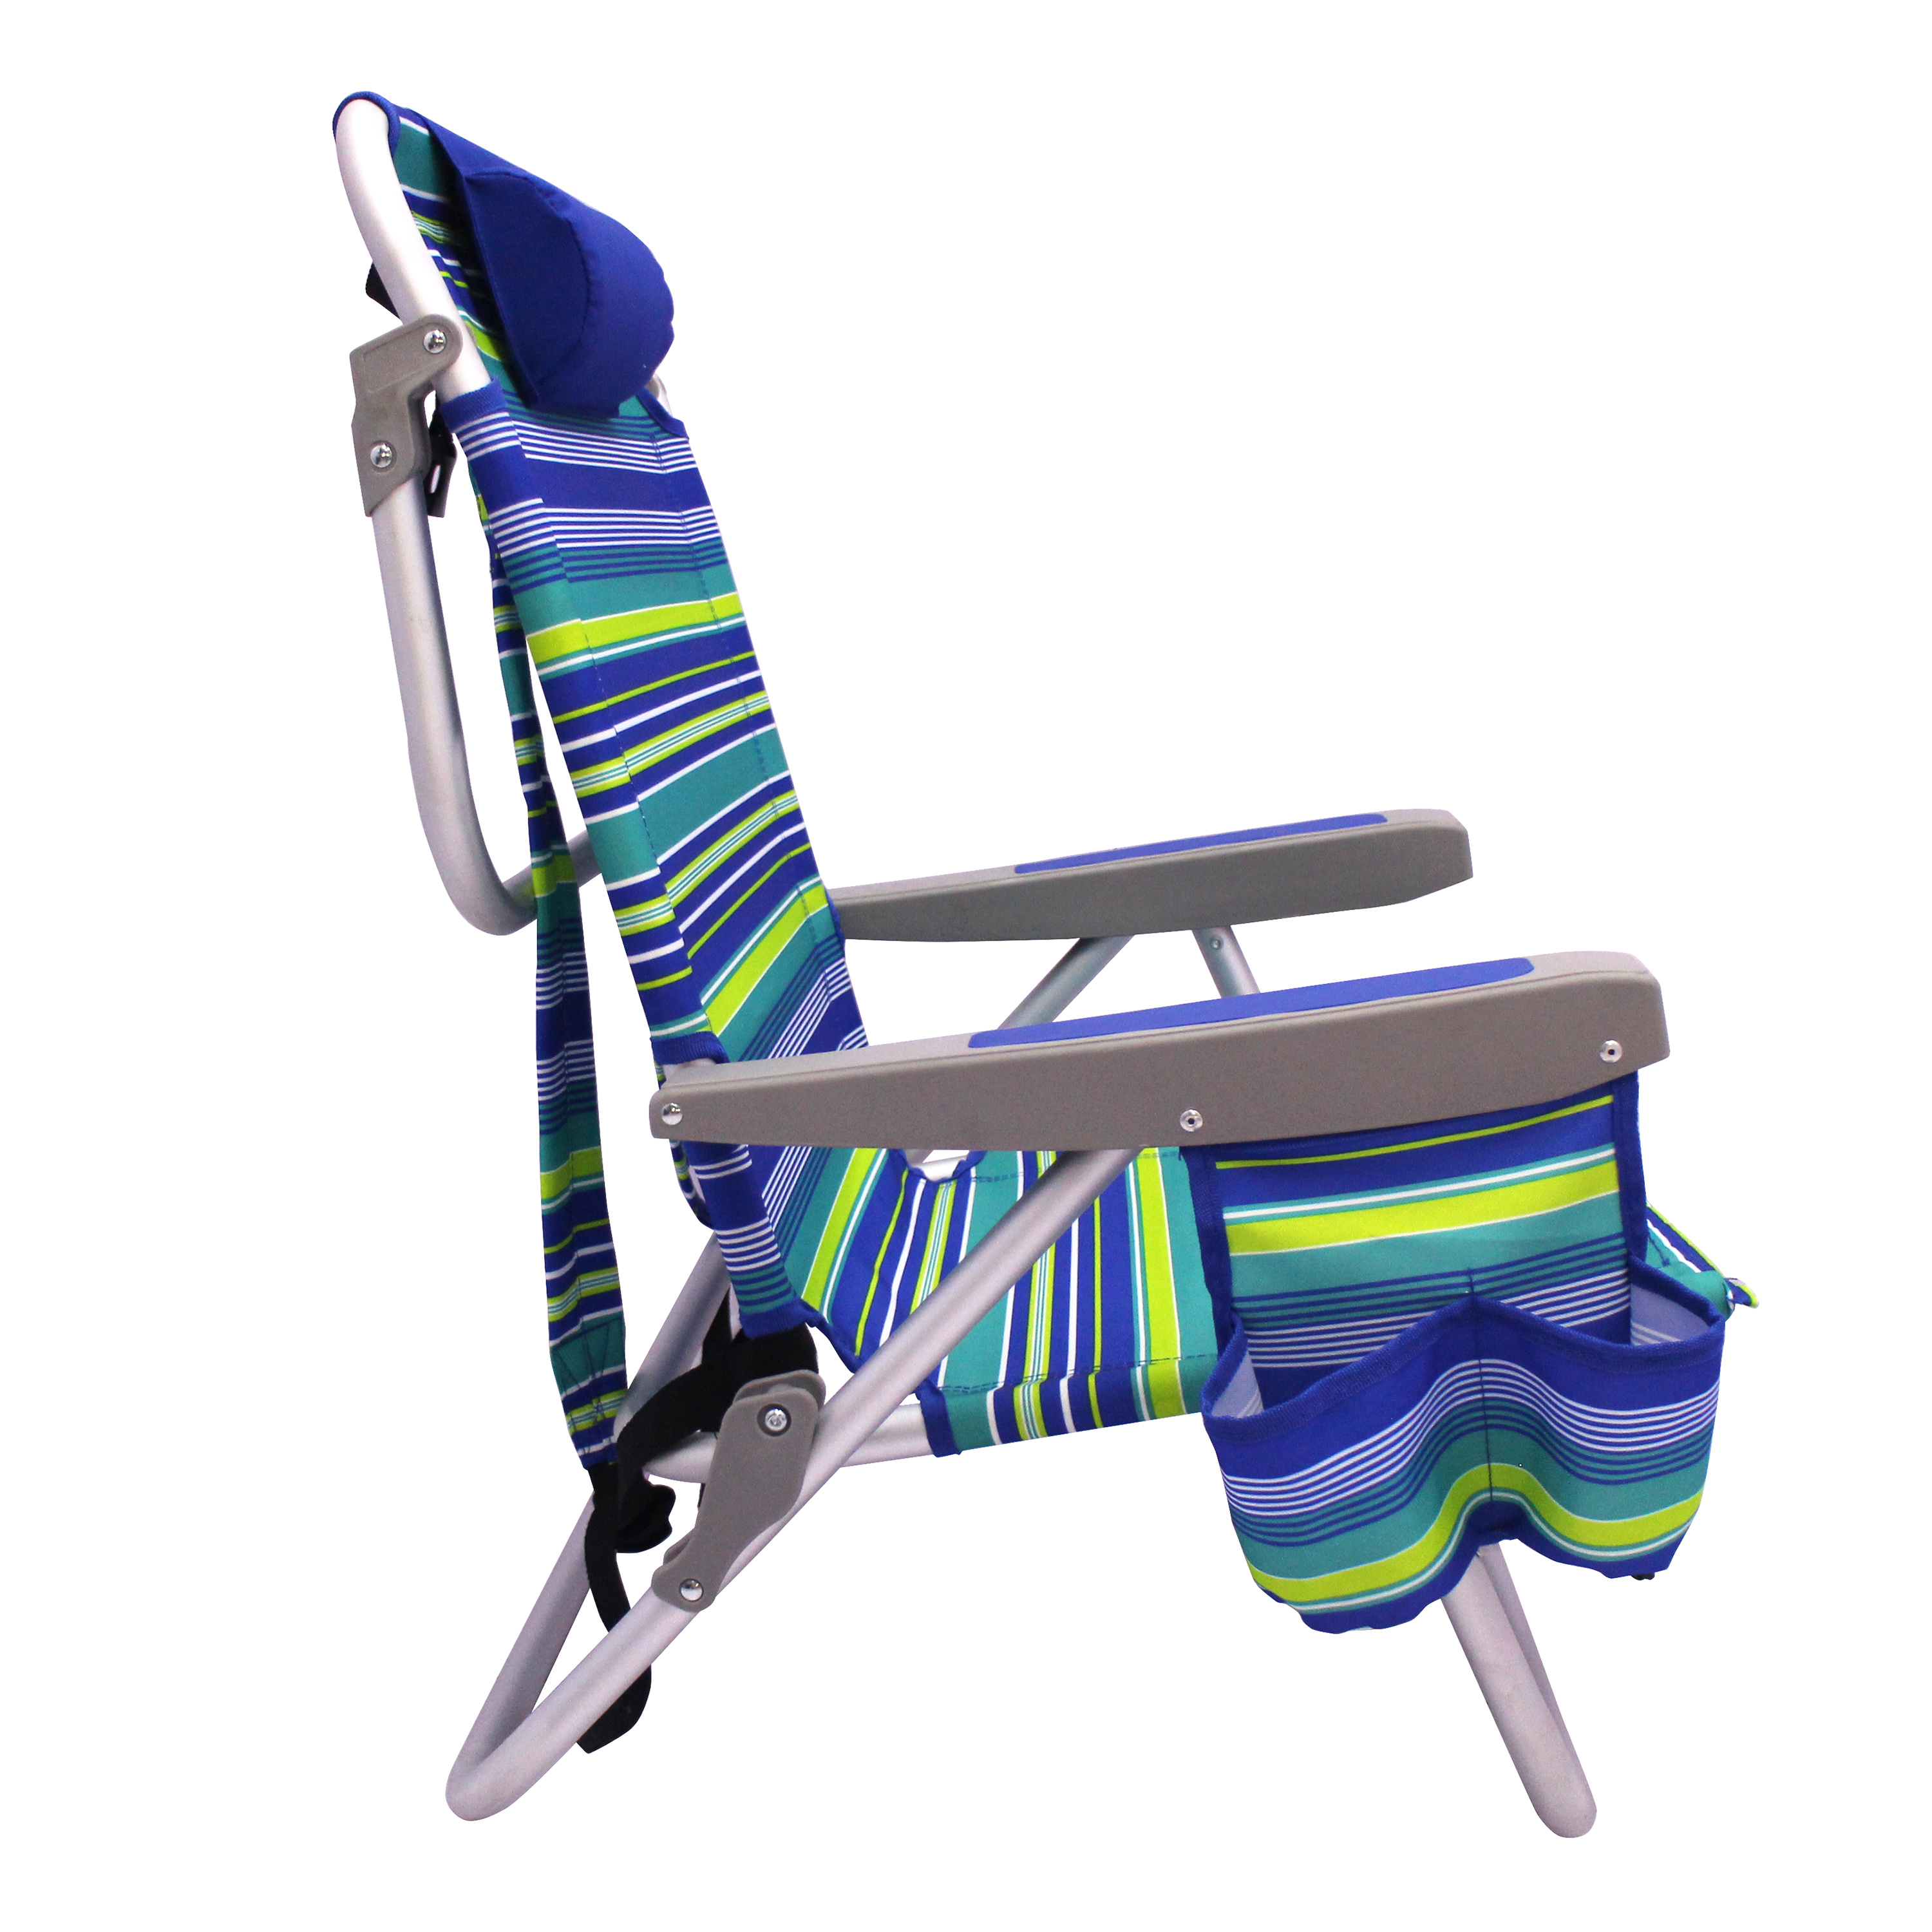 Mainstays Backpack Aluminum Beach Chair, Multi-color - image 5 of 11